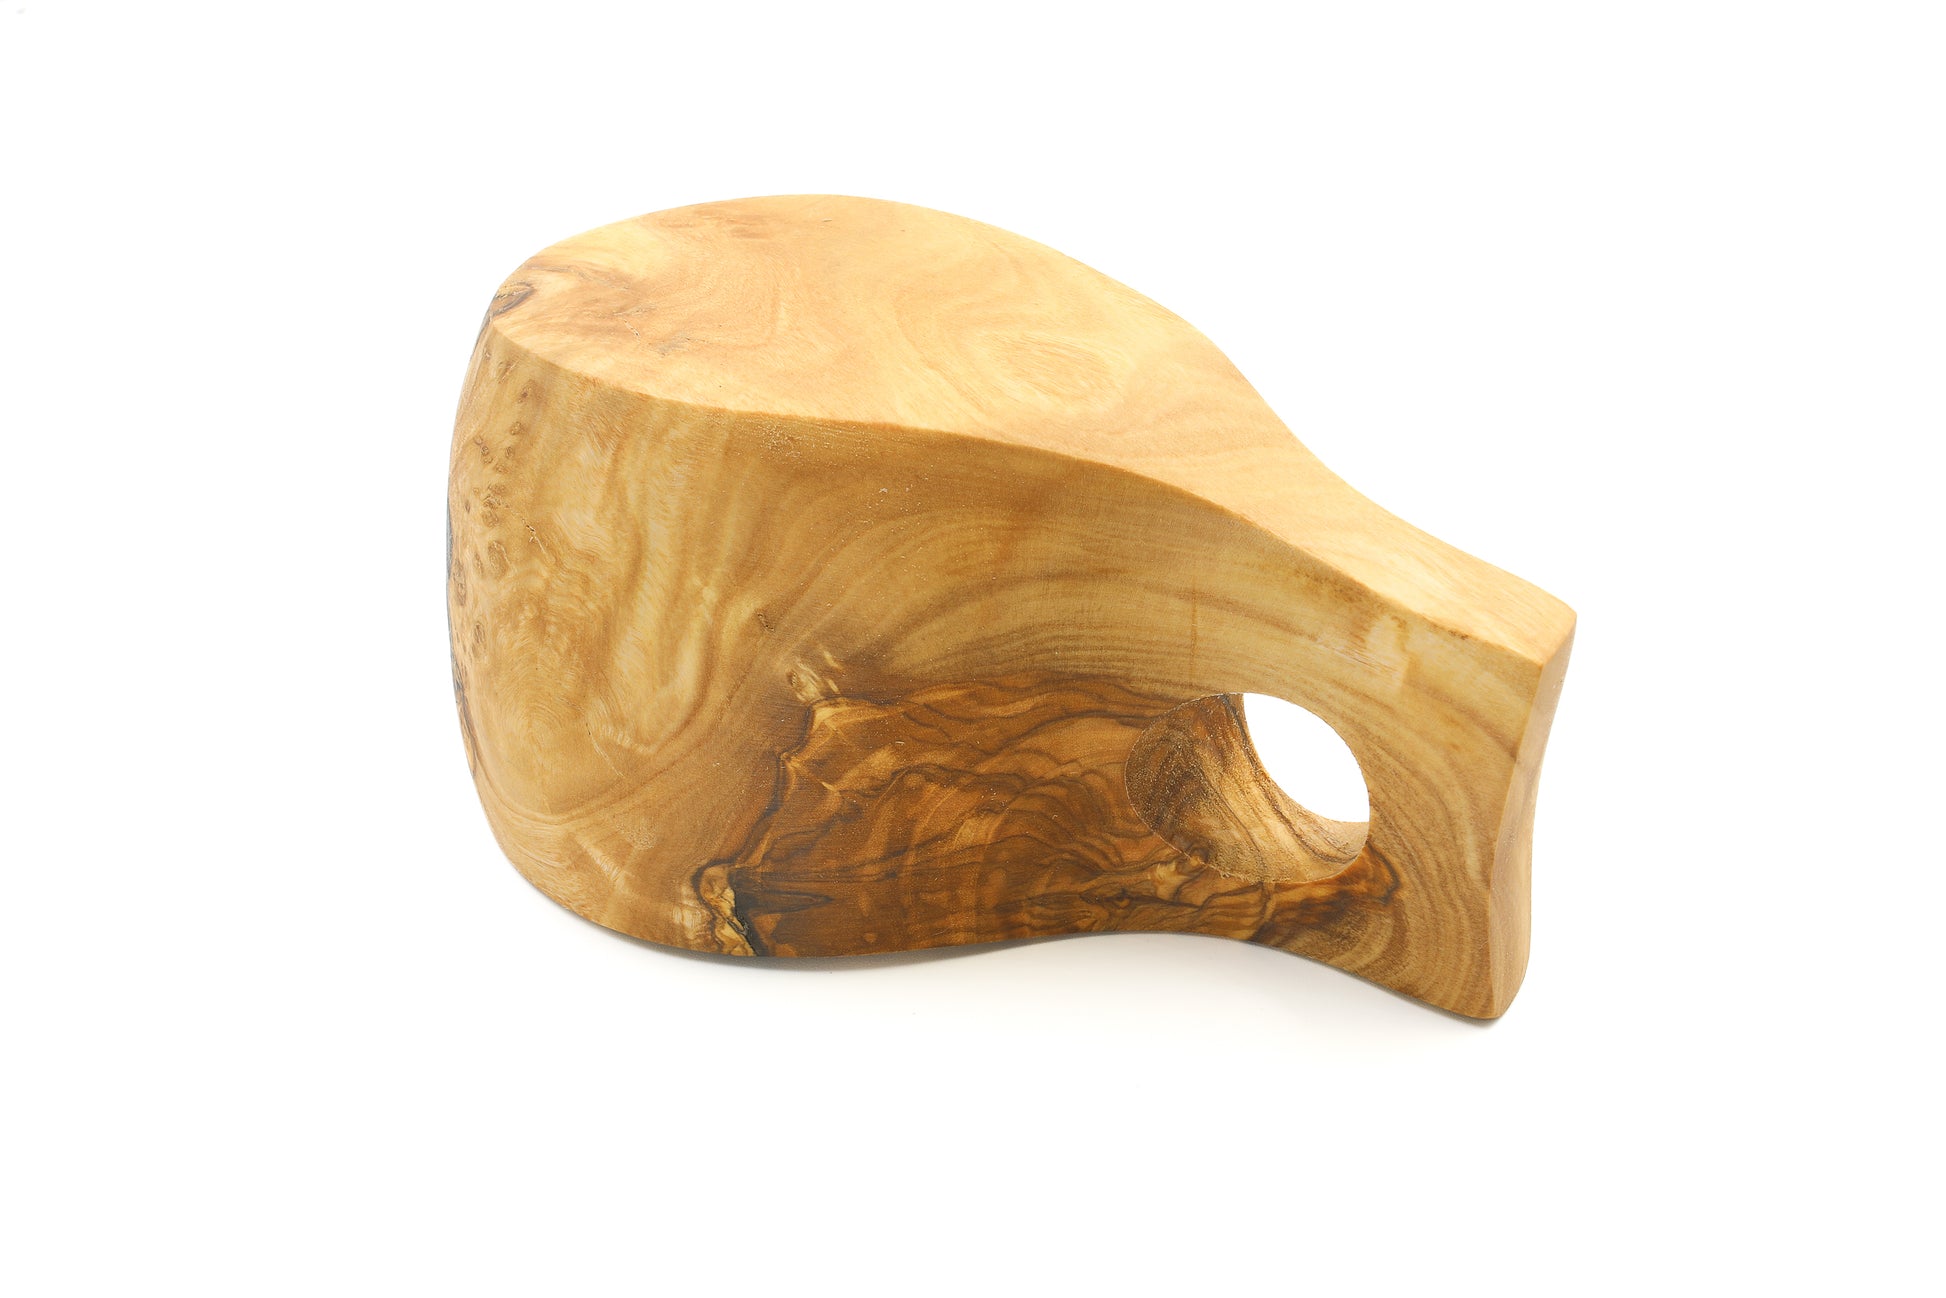 Hand-carved olive wood kuksa, a Scandi-style coffee cup